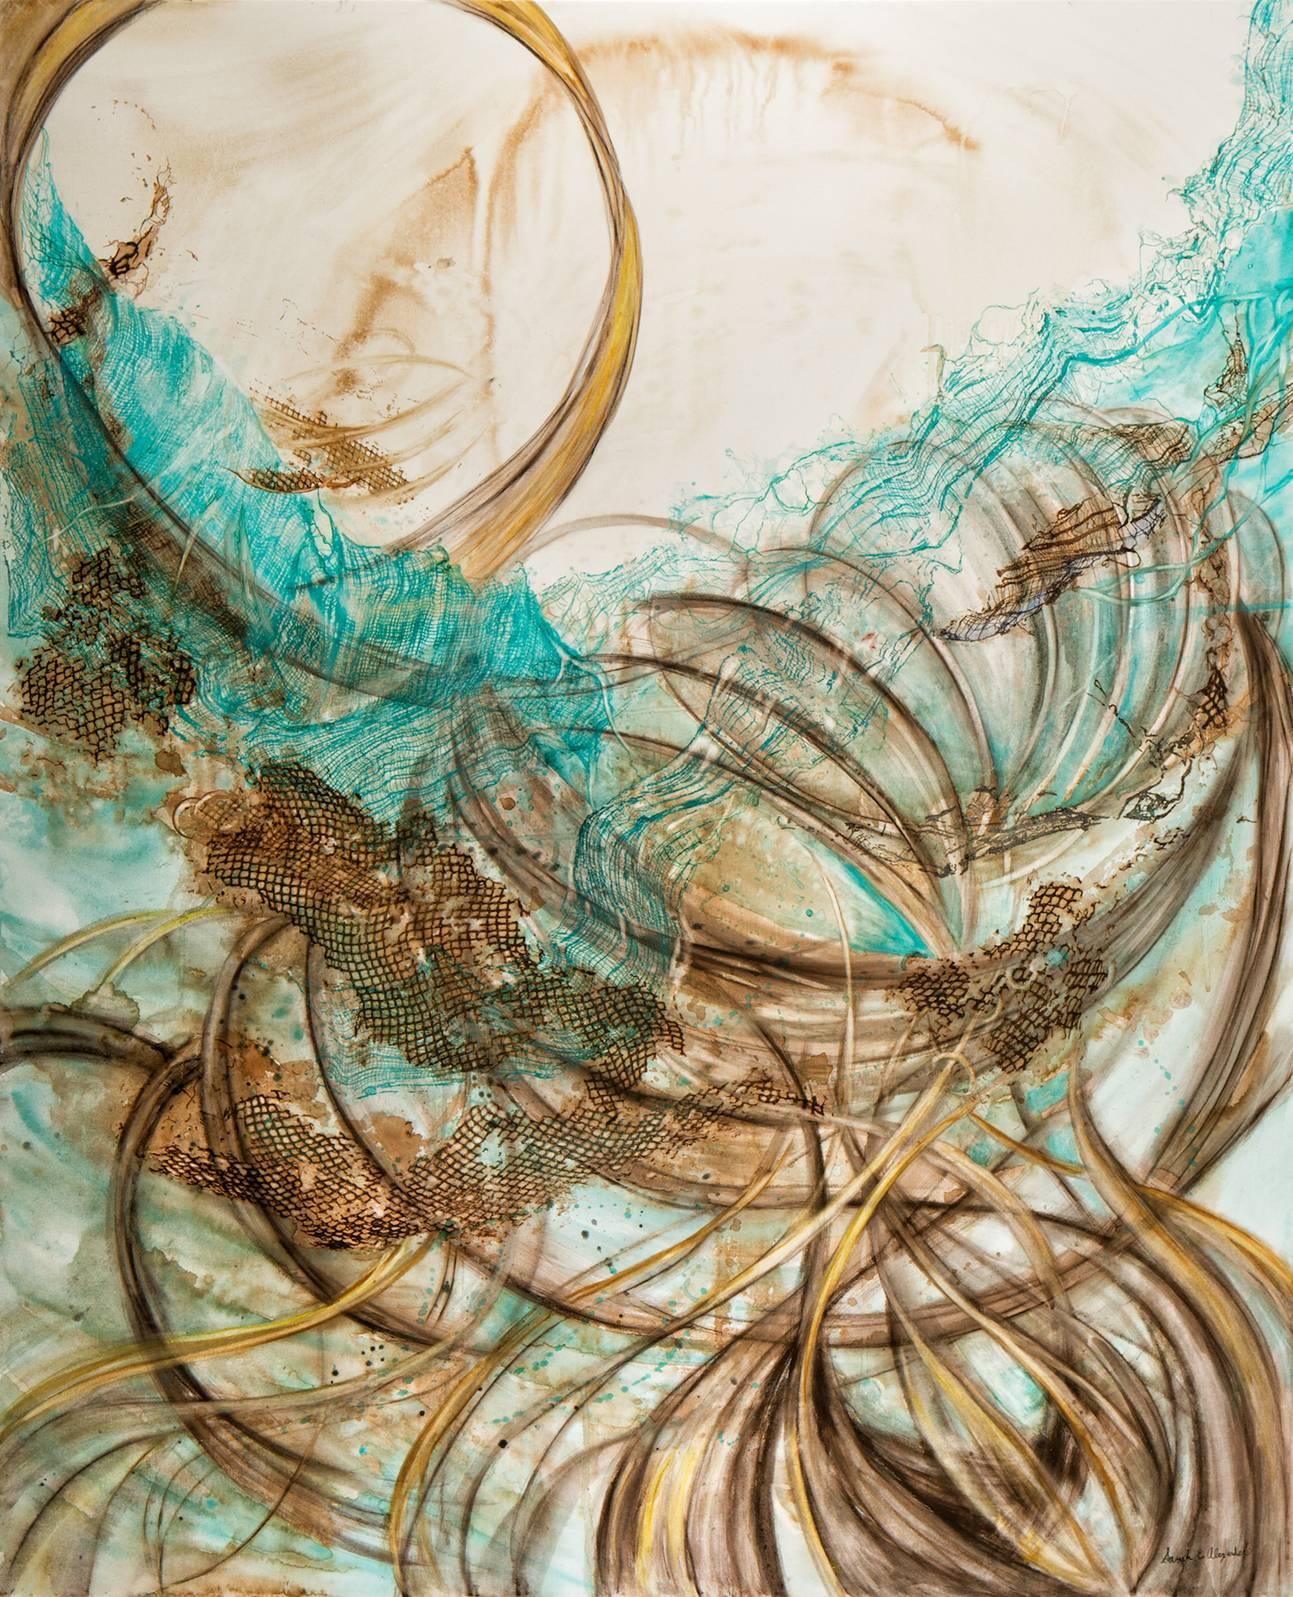 "In Flux", abstract, turquoise, brown, mixed media, watercolor, painting